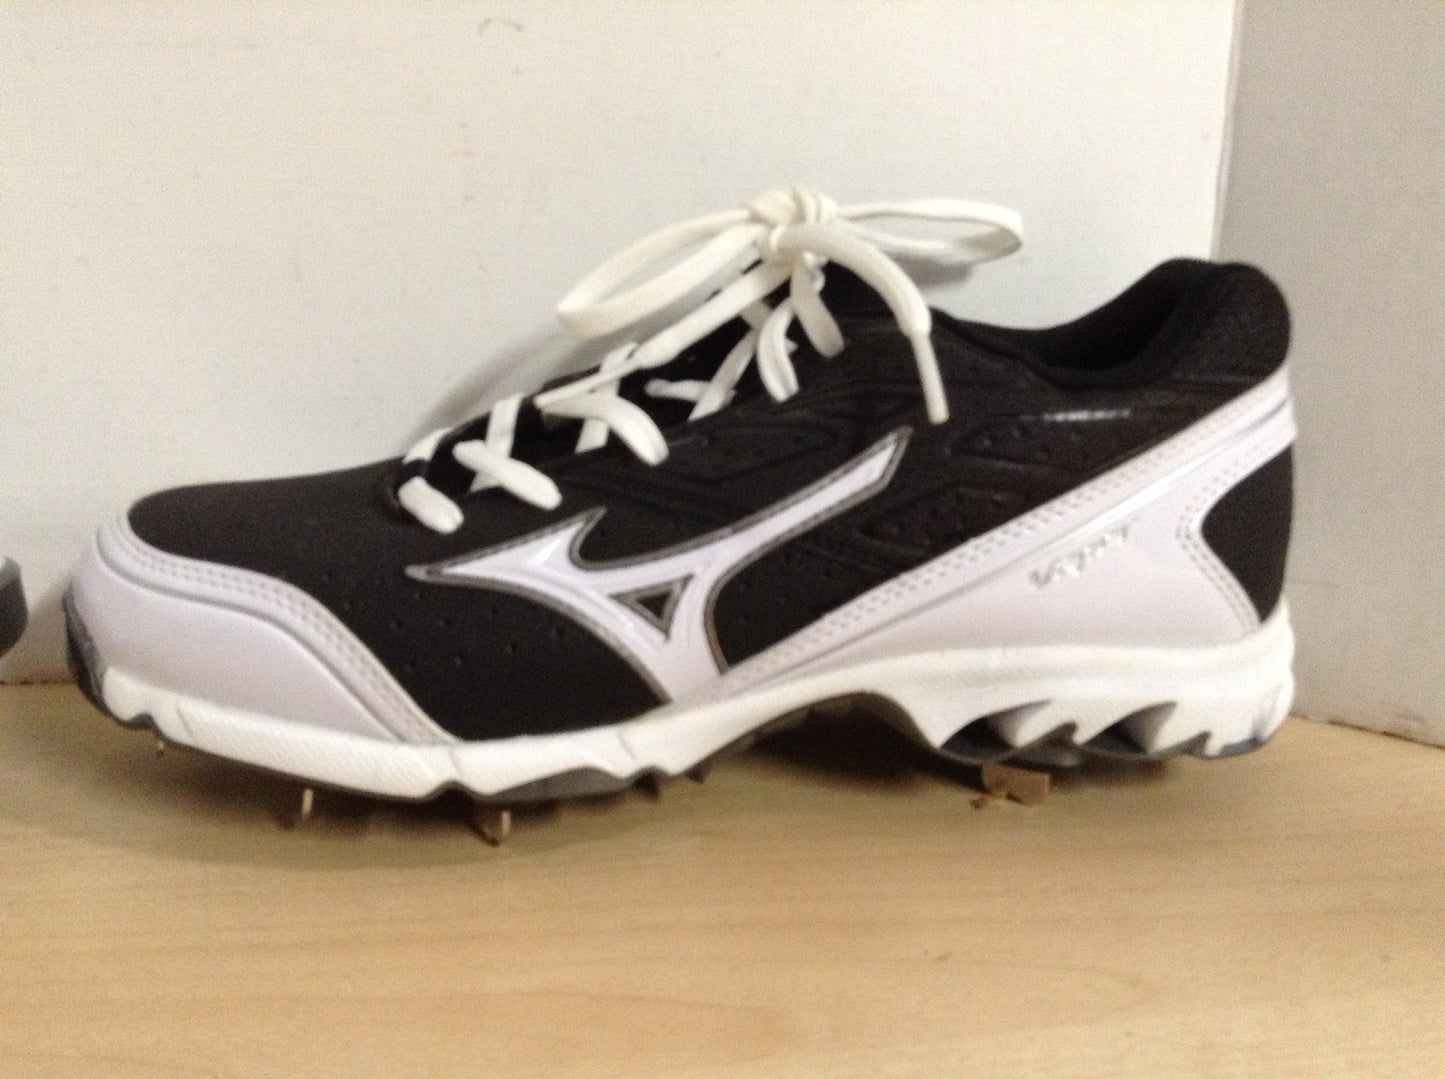 Baseball Shoes Cleats Men's Size 8.5 Mizuno Vapor Elite 6 9 inch Spike NEW With Tags